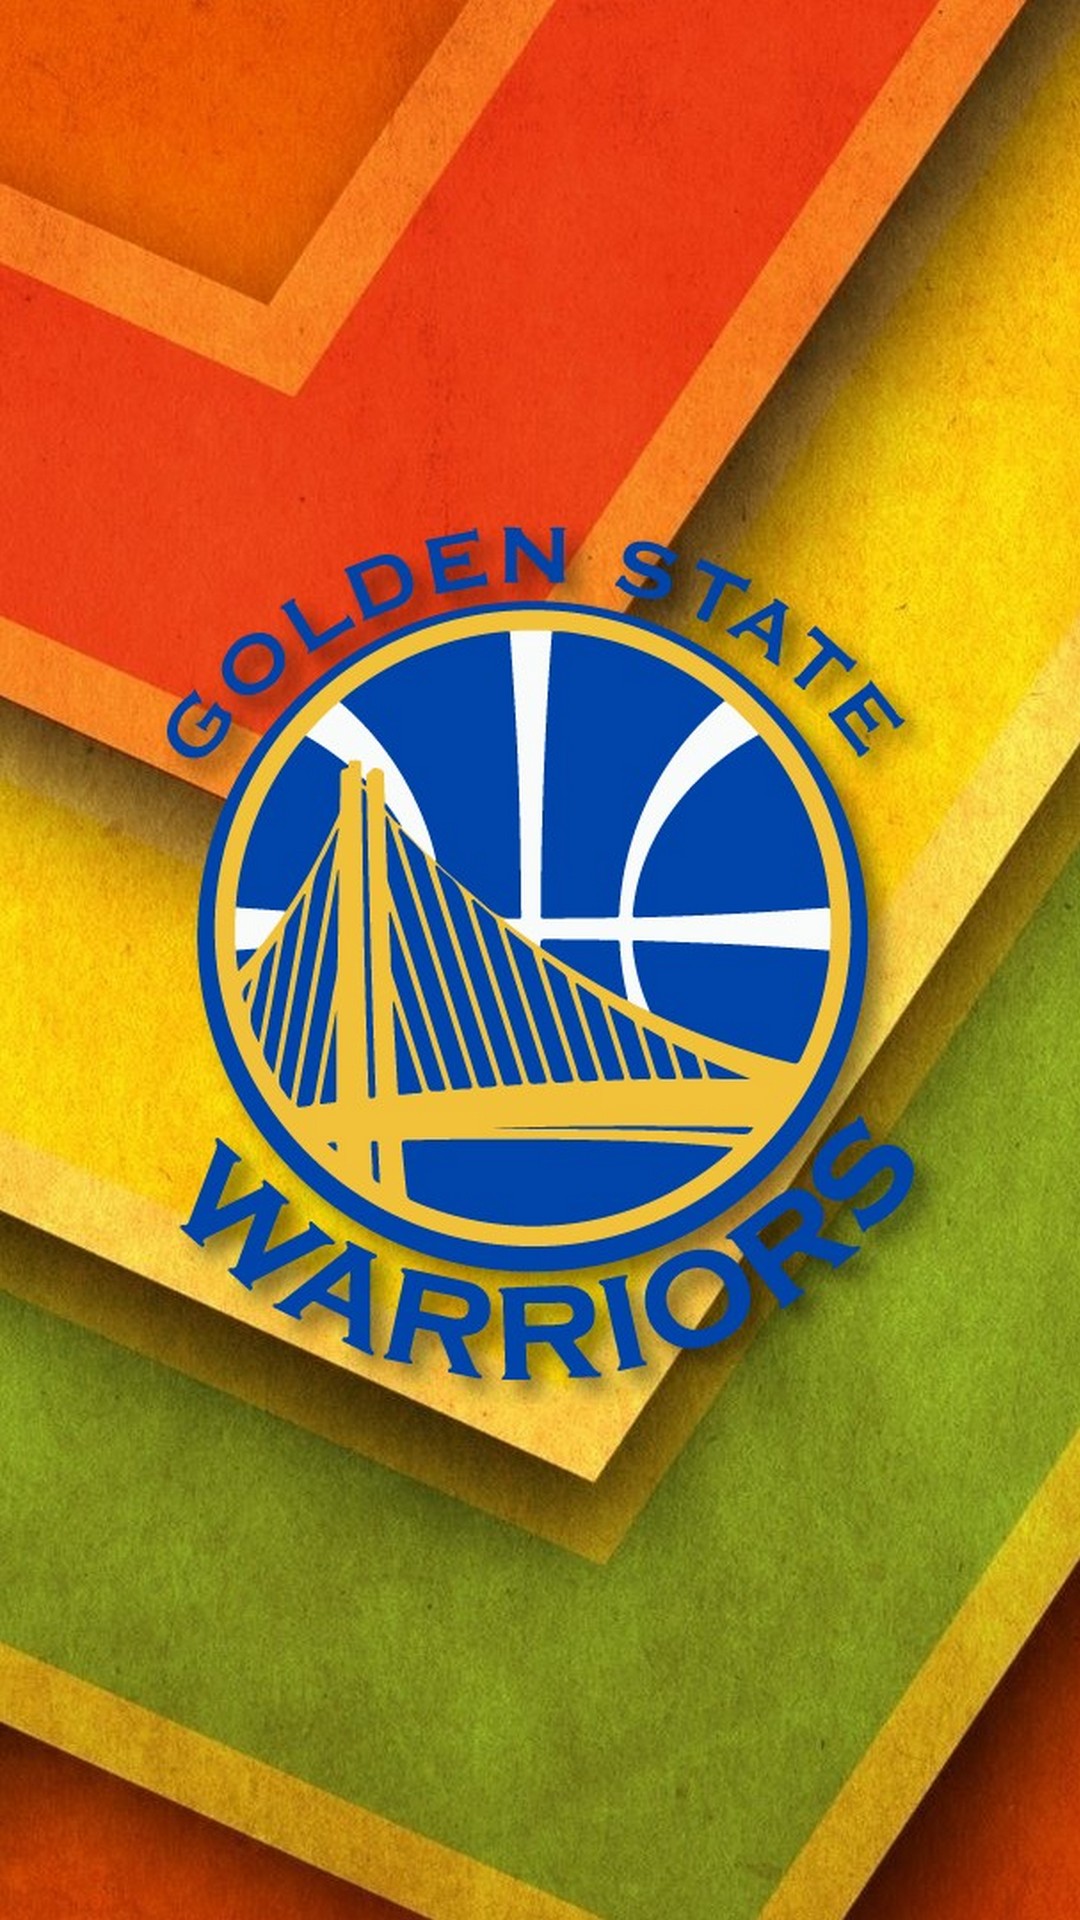 Mobile Wallpaper HD Golden State Warriors with image dimensions 1080x1920 pixel. You can make this wallpaper for your Desktop Computer Backgrounds, Windows or Mac Screensavers, iPhone Lock screen, Tablet or Android and another Mobile Phone device